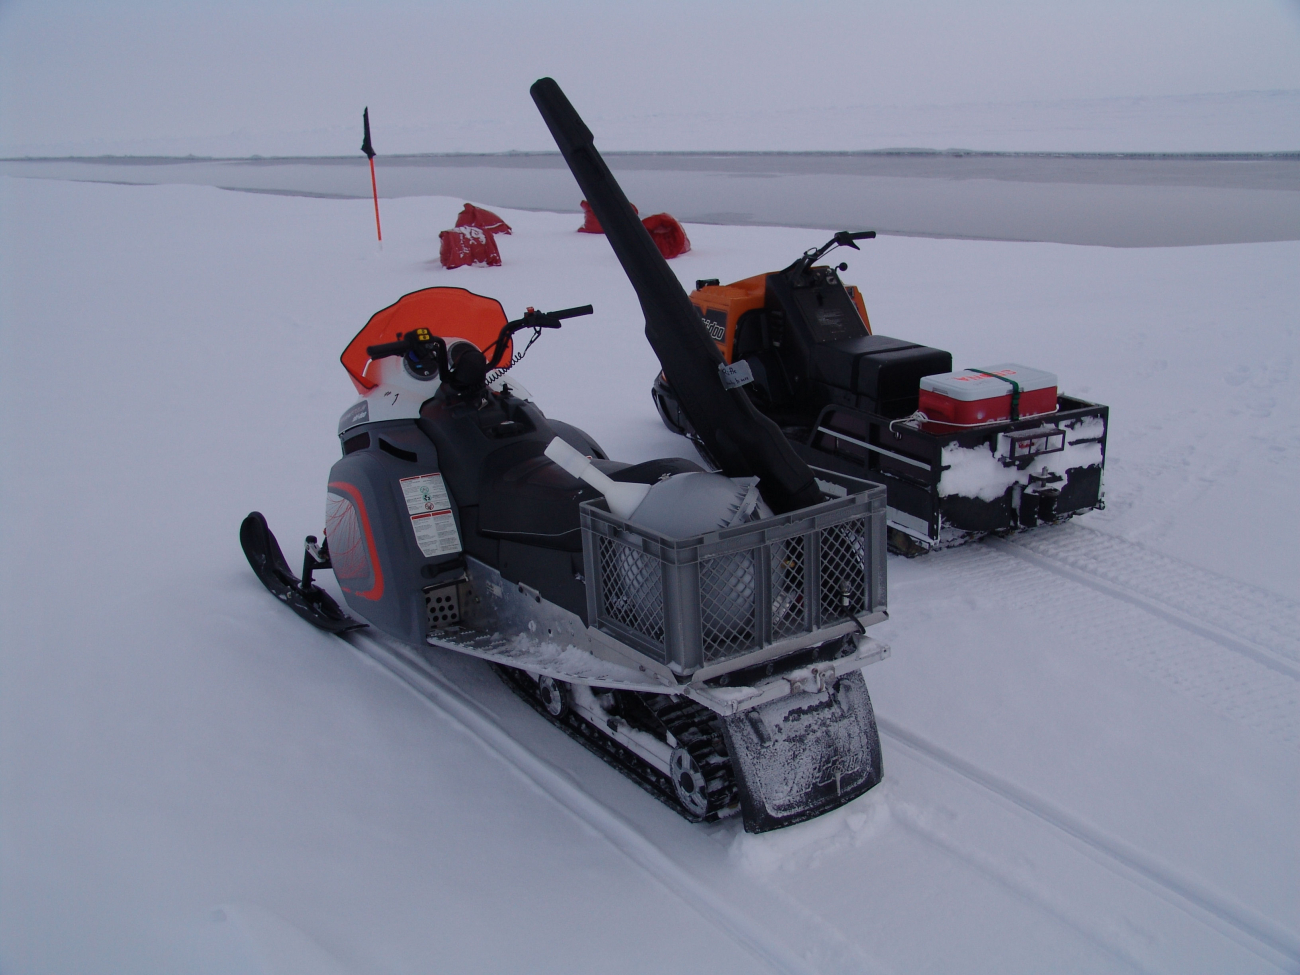 Snow-mobiles used to transport scientists checking sensor array alongopening lead